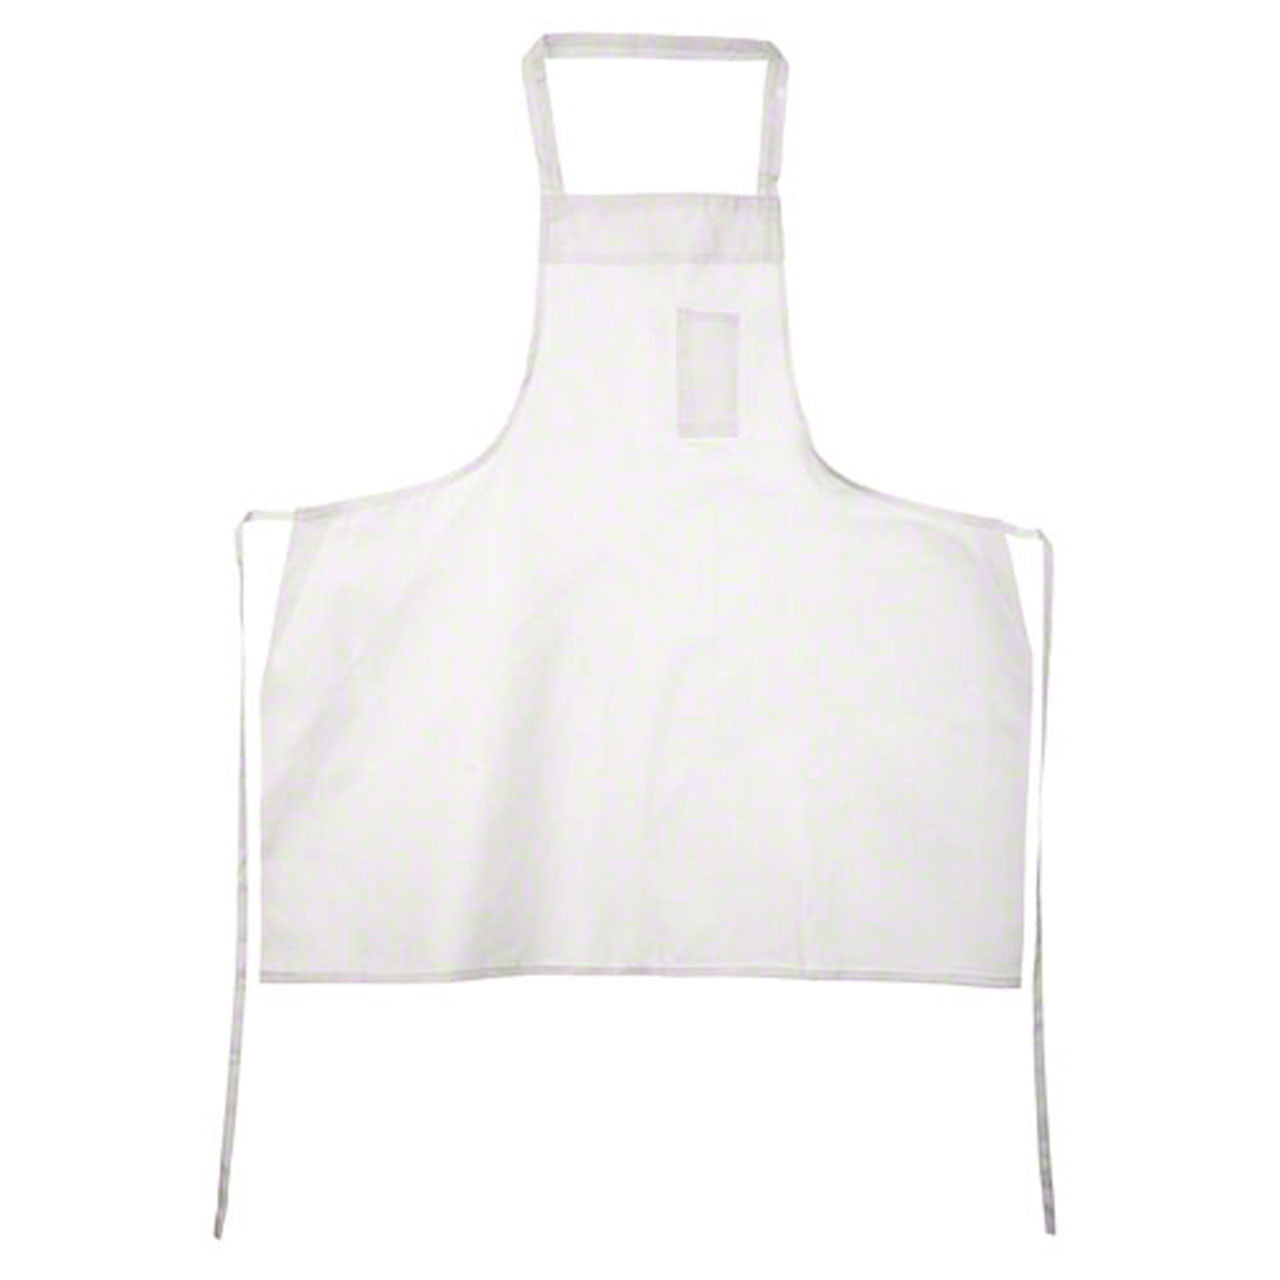 How much does the fabric weigh in these cheap white aprons, the White Economy Bib Aprons?